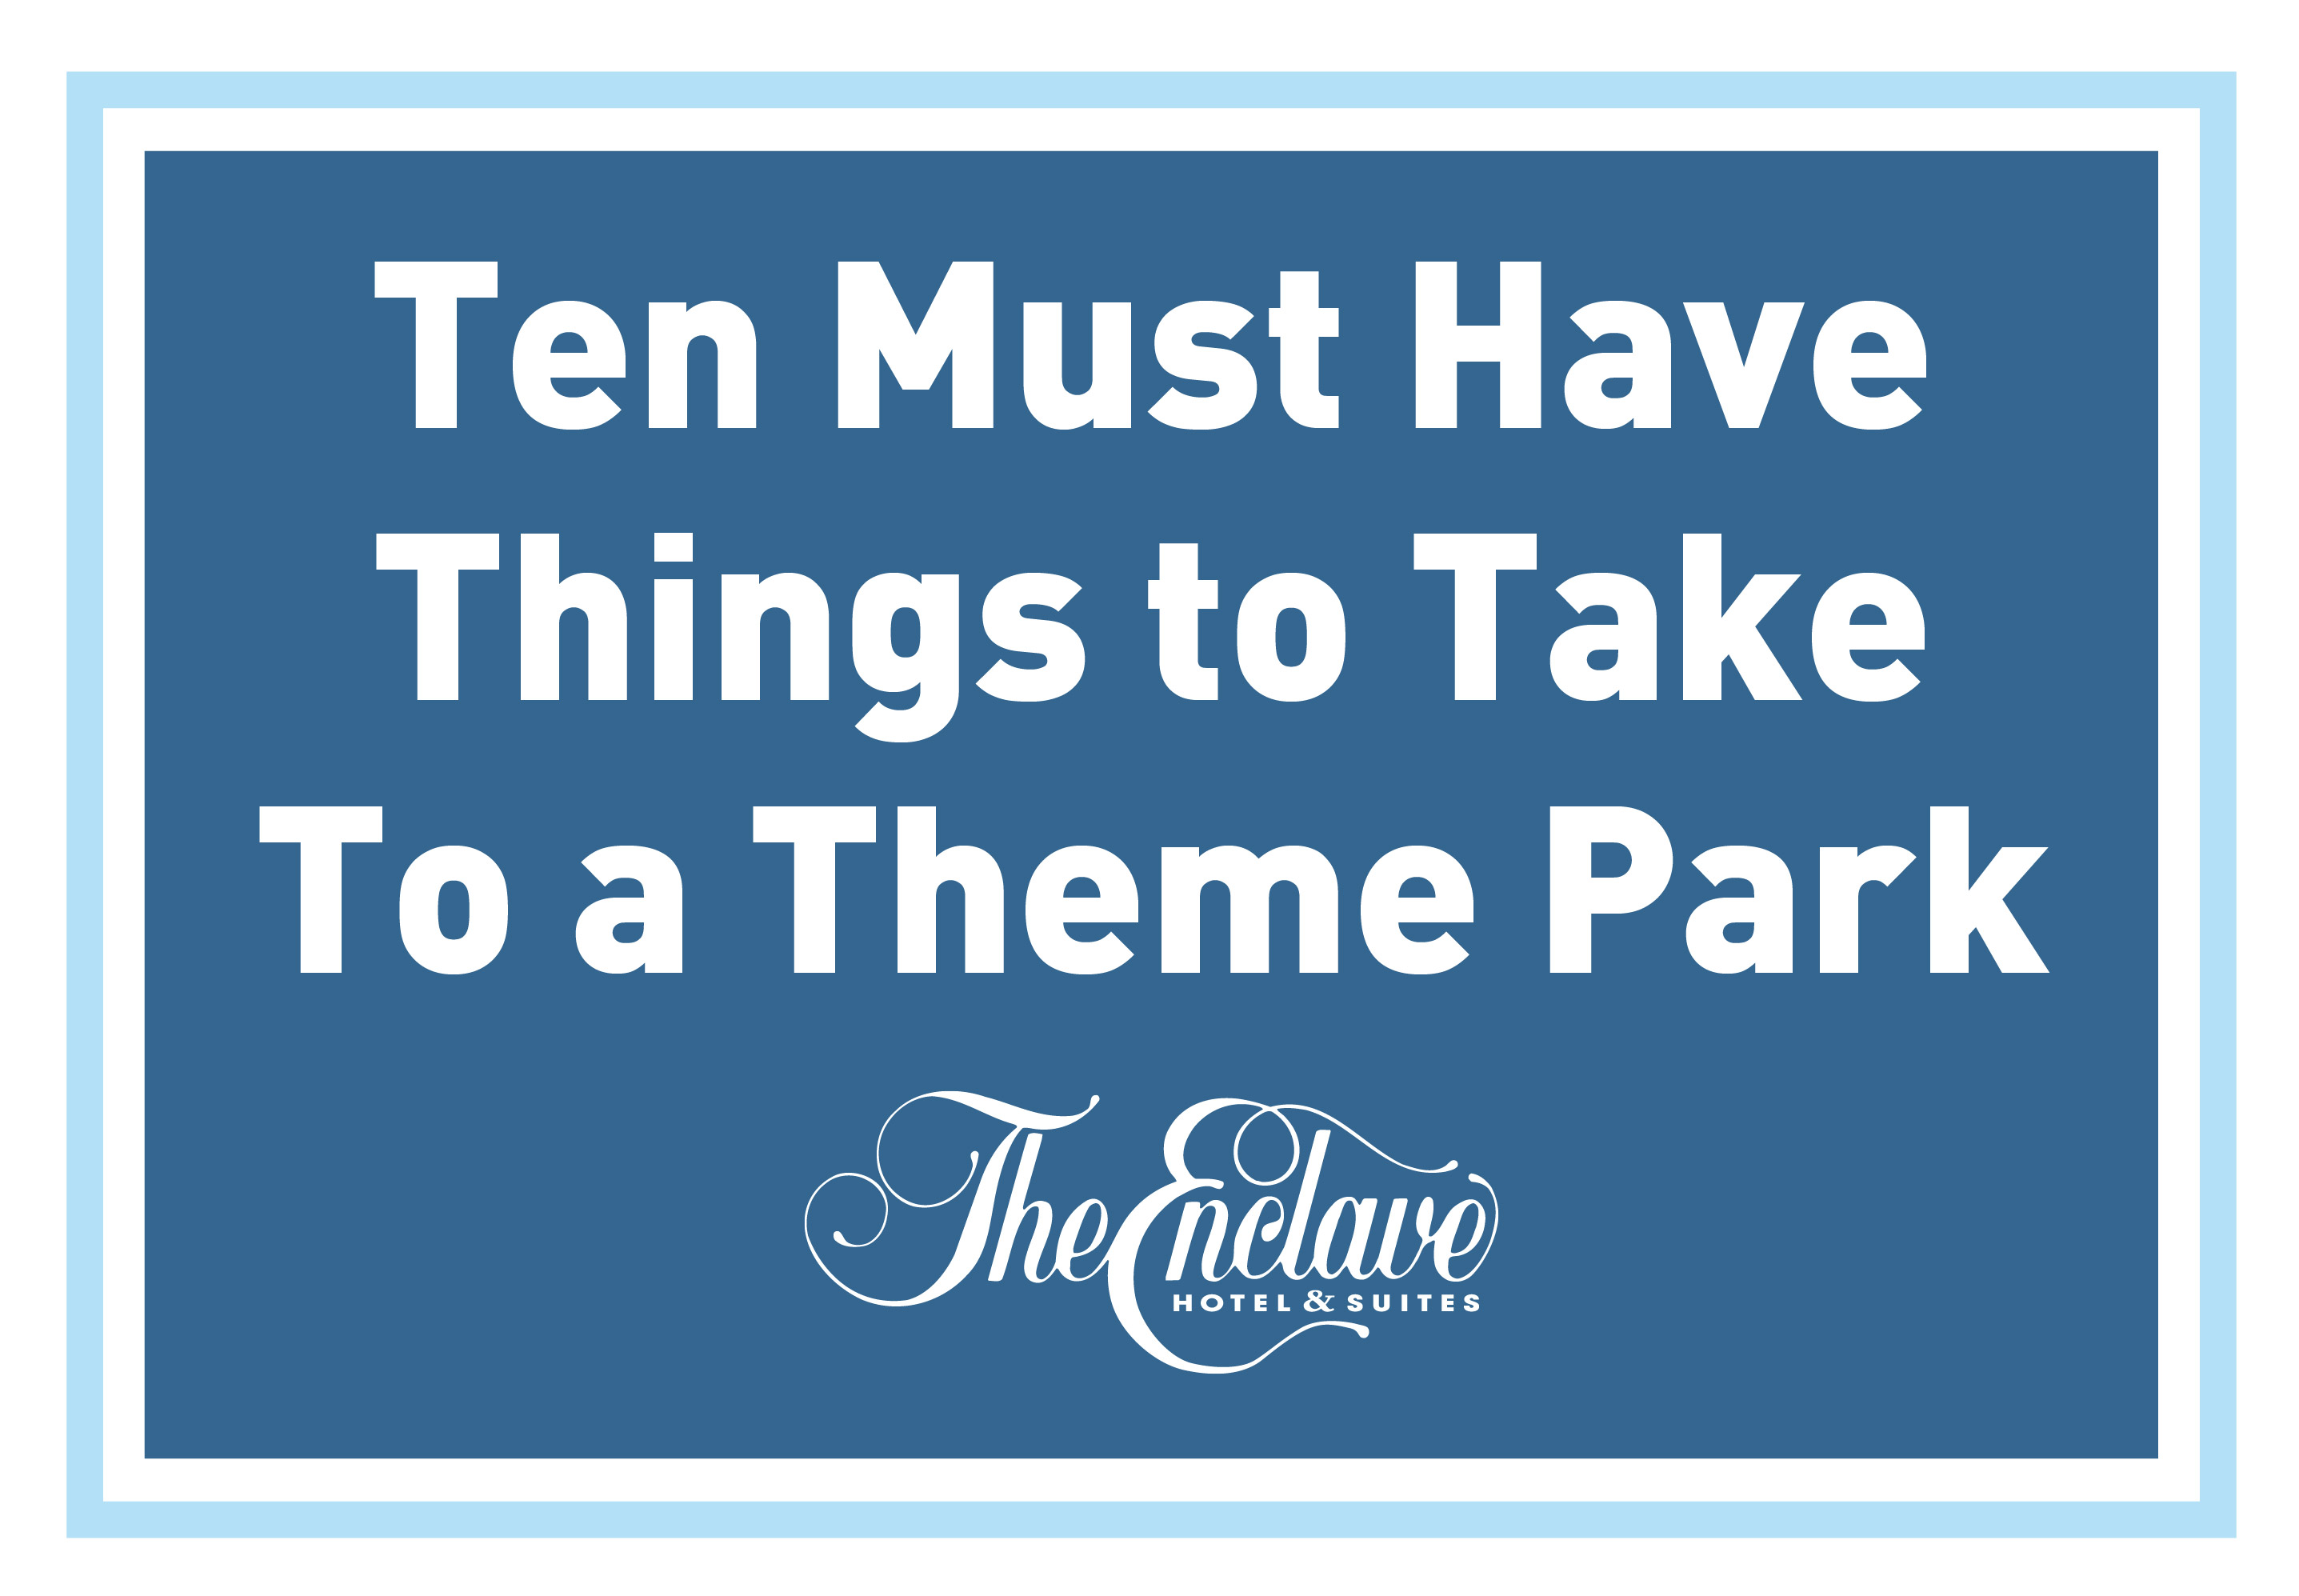 Ten must have things to take to a theme park